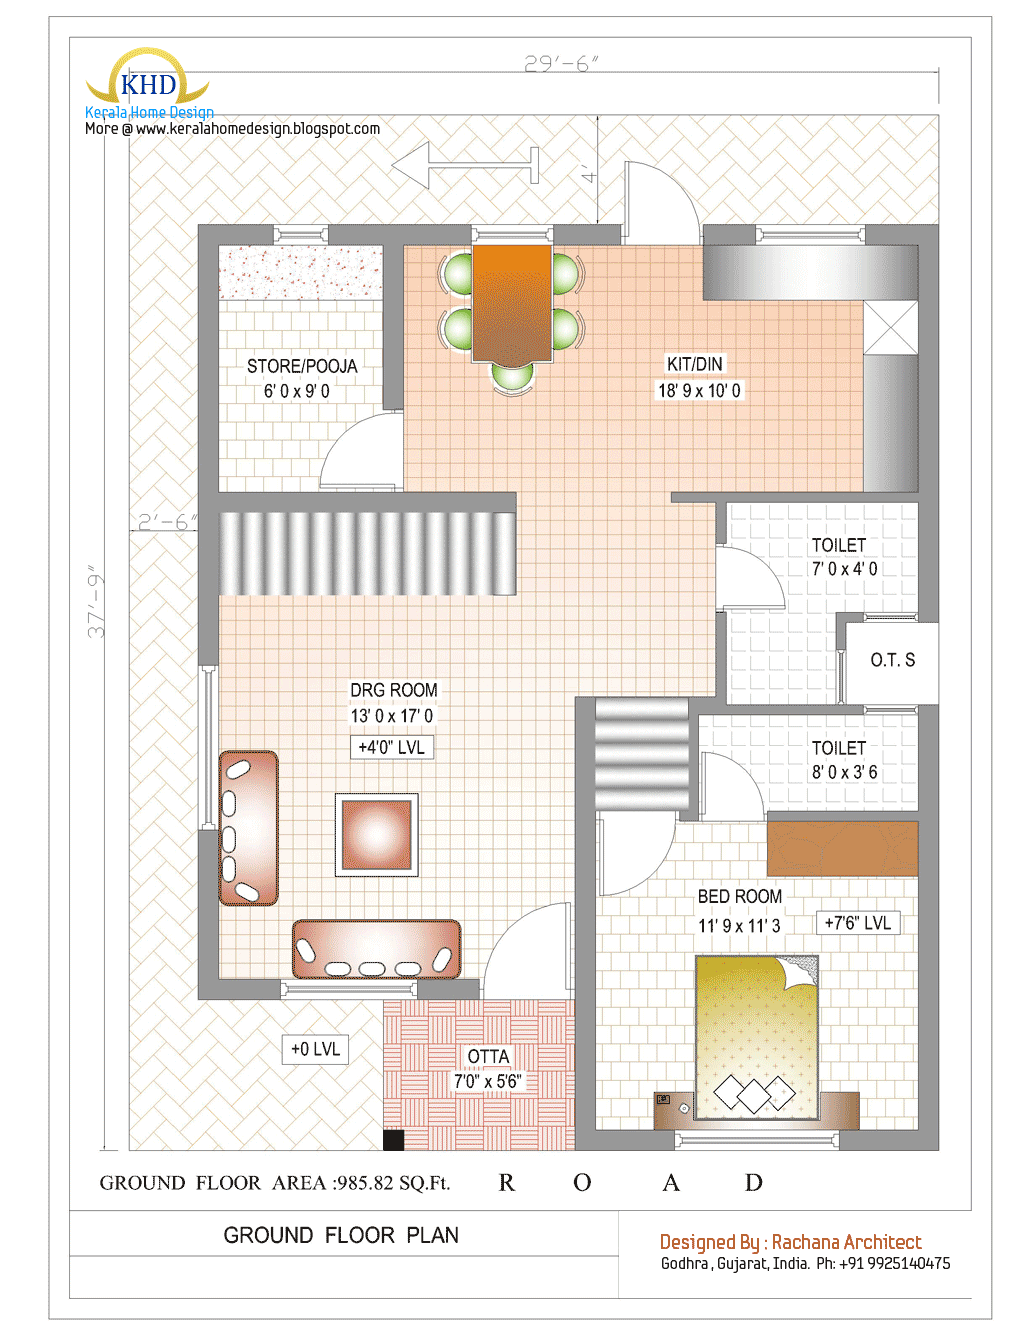  Duplex  House  Plan  and Elevation 1770 Sq  Ft  home 